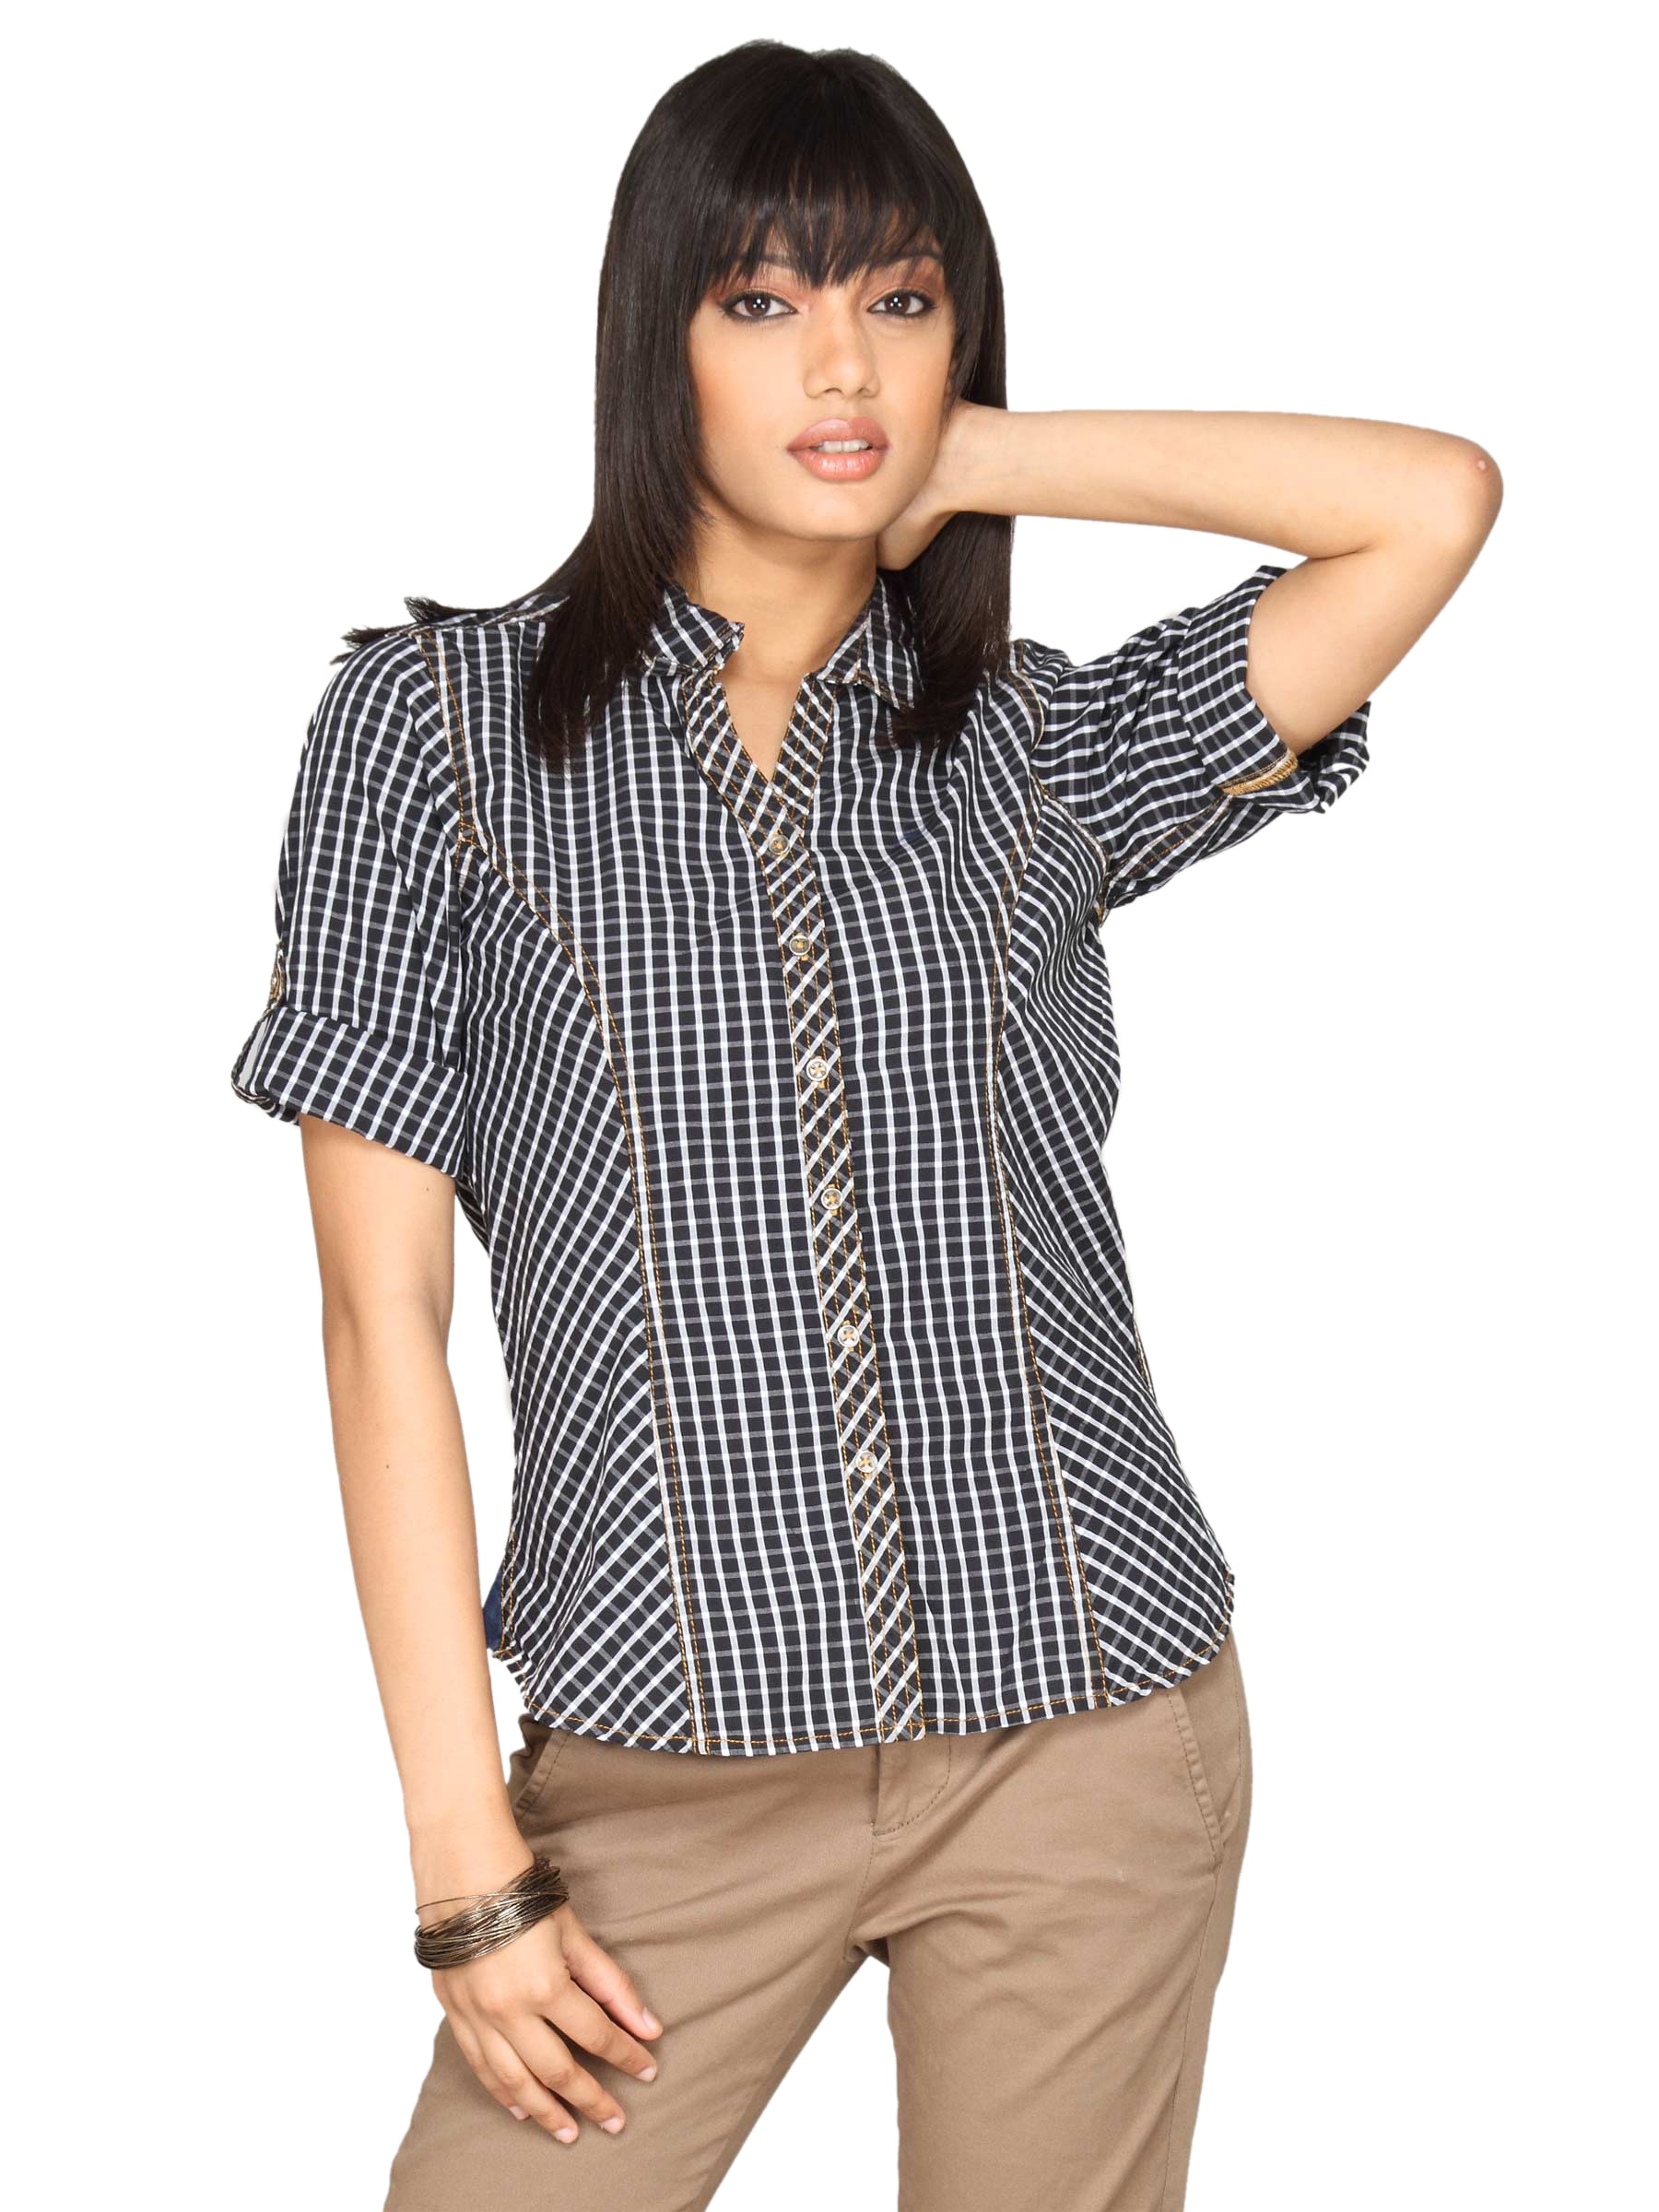 Scullers For Her Women Rivited Check Black Shirts